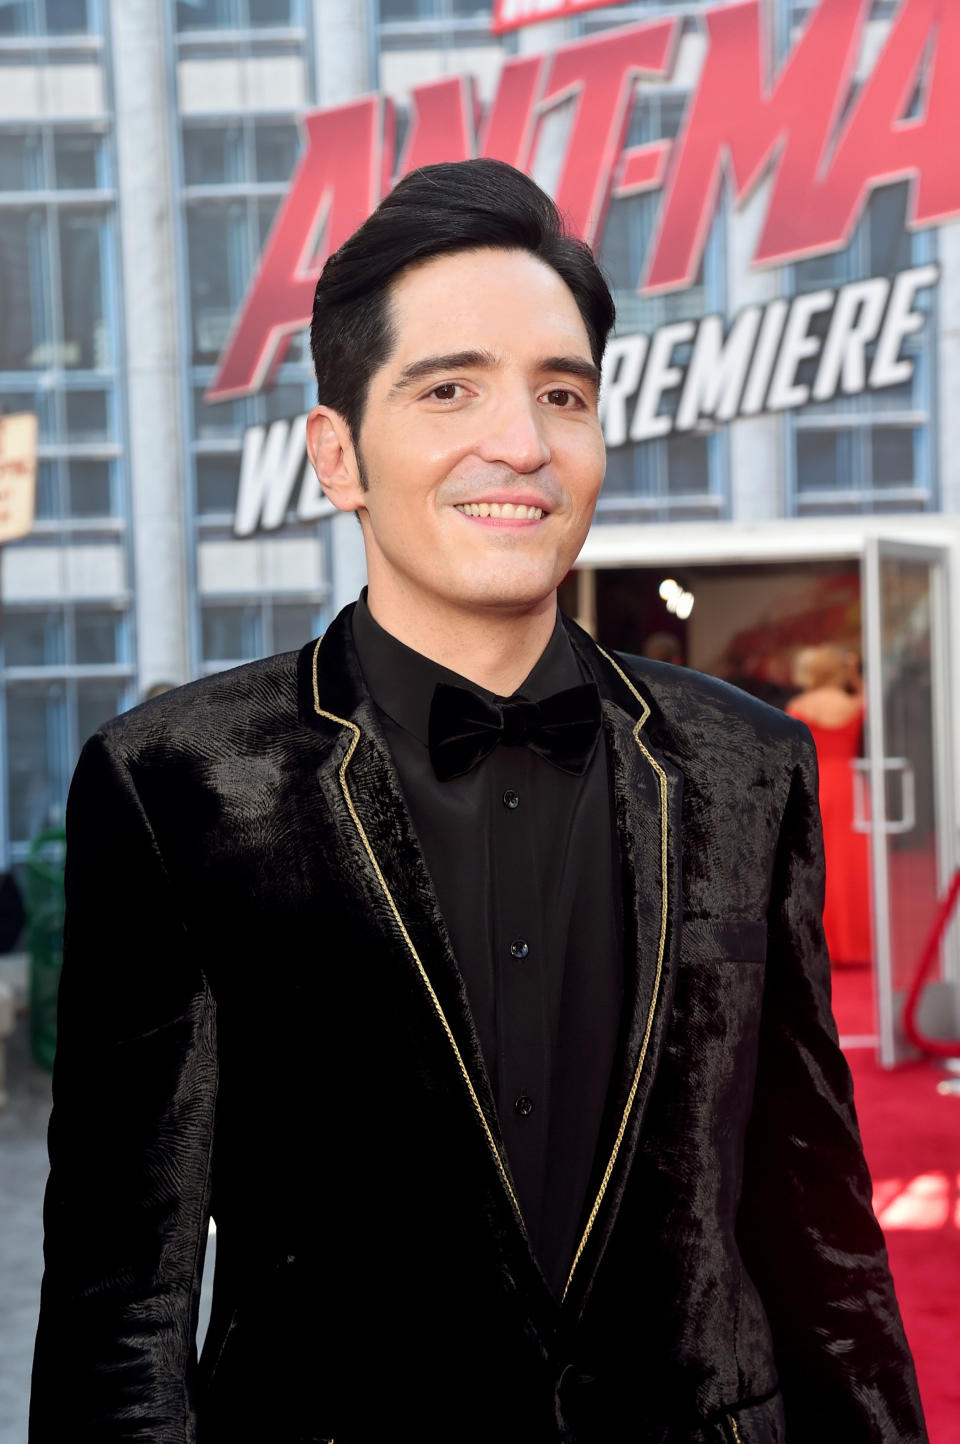 Head and shoulders shot of David smiling at the Ant-Man world premiere, wearing a black velvet jacket with gold trim around the lapels and a black shirt.